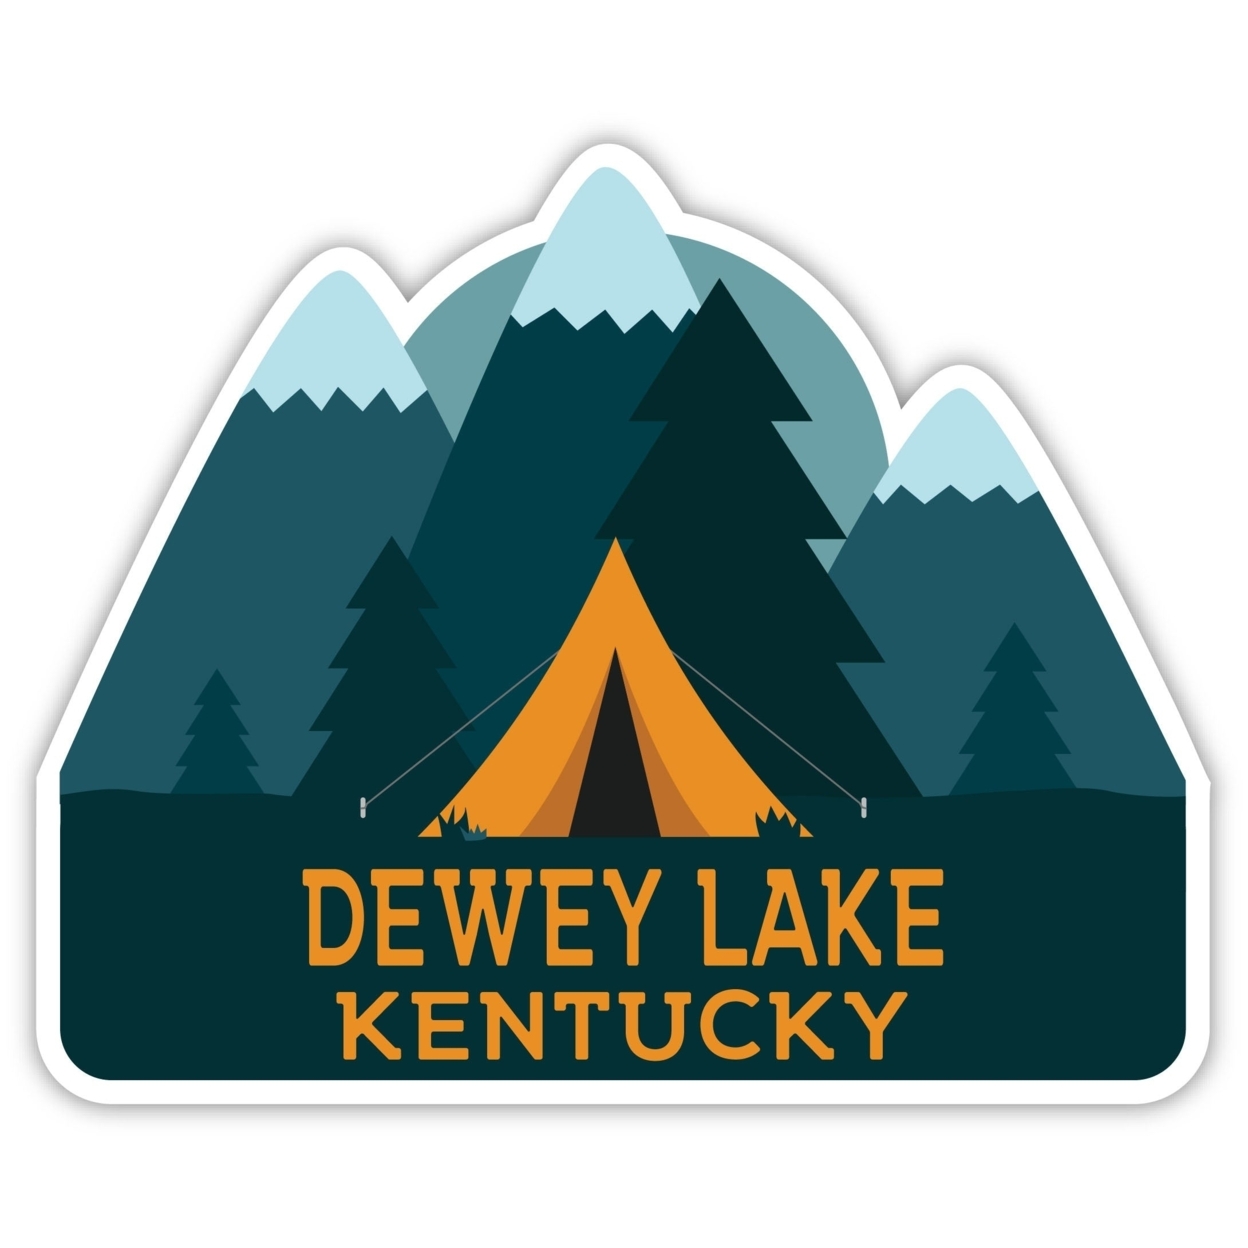 Dewey Lake Kentucky Souvenir Decorative Stickers (Choose Theme And Size) - 4-Pack, 8-Inch, Tent